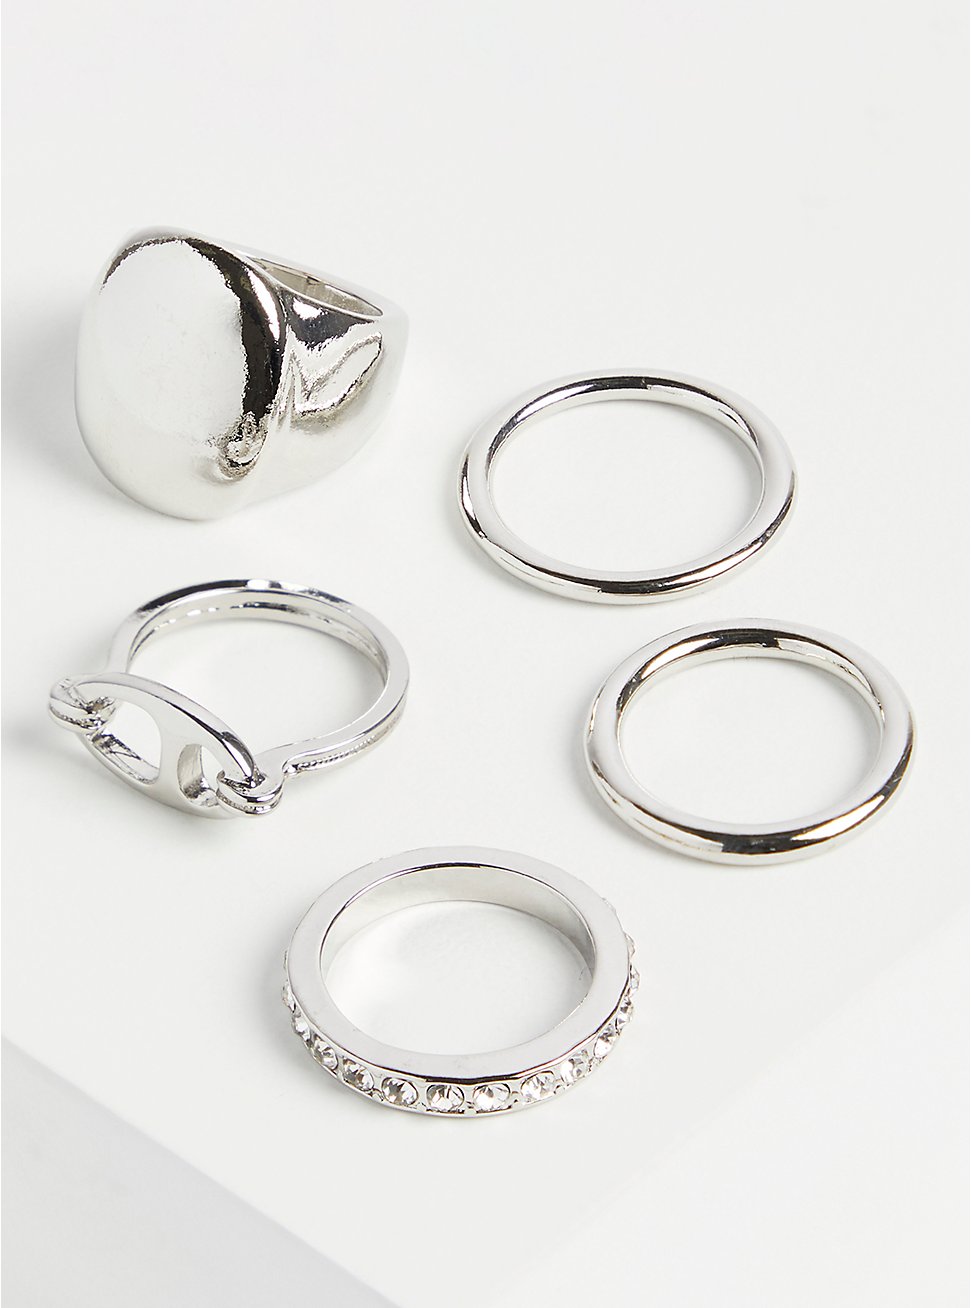 Dome Ring and Bands Ring Set of 5 - Silver Tone, SILVER, hi-res